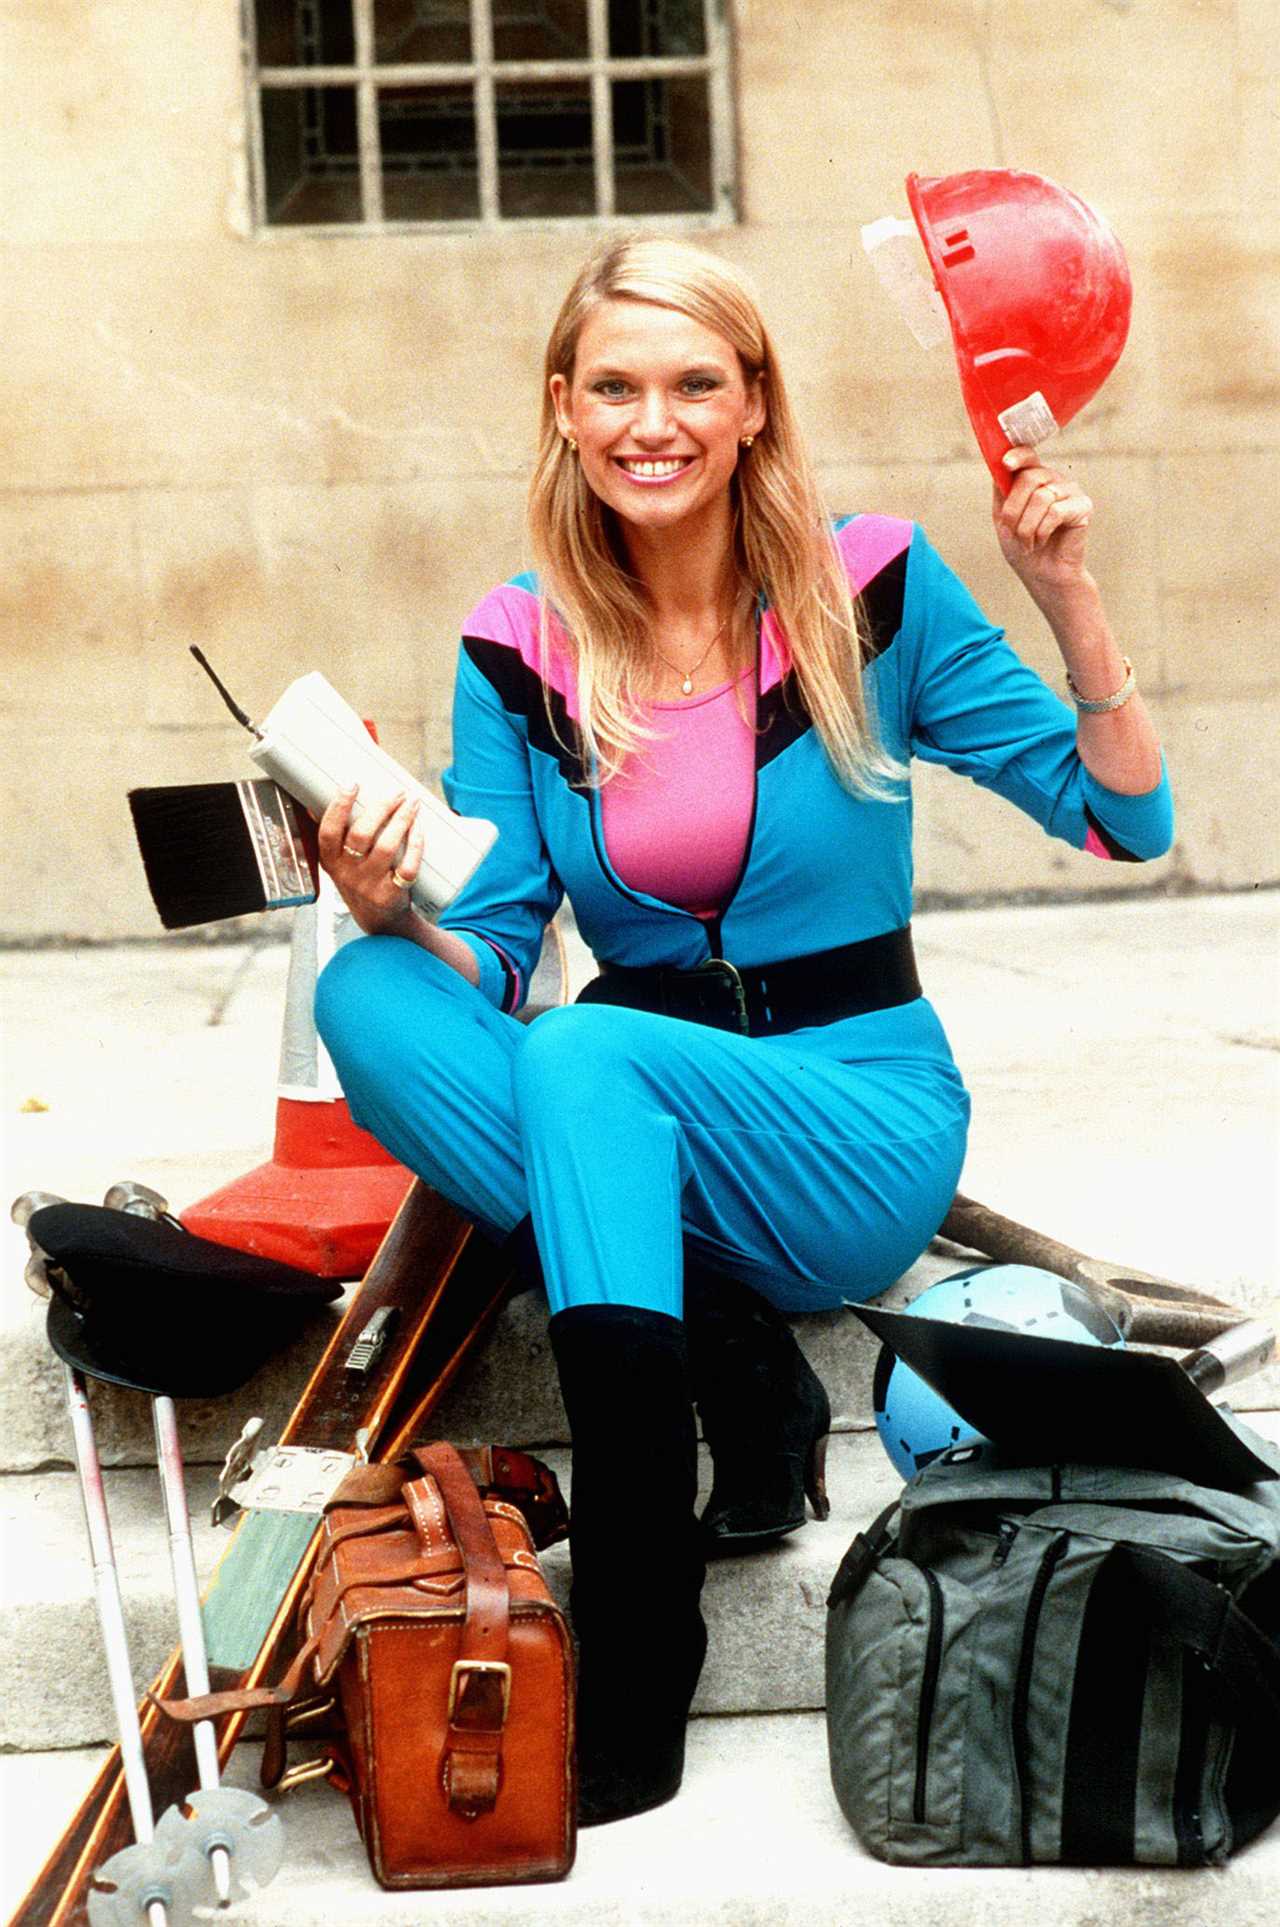 Legendary TV show Challenge Anneka’s return date finally confirmed after 30 years off screen